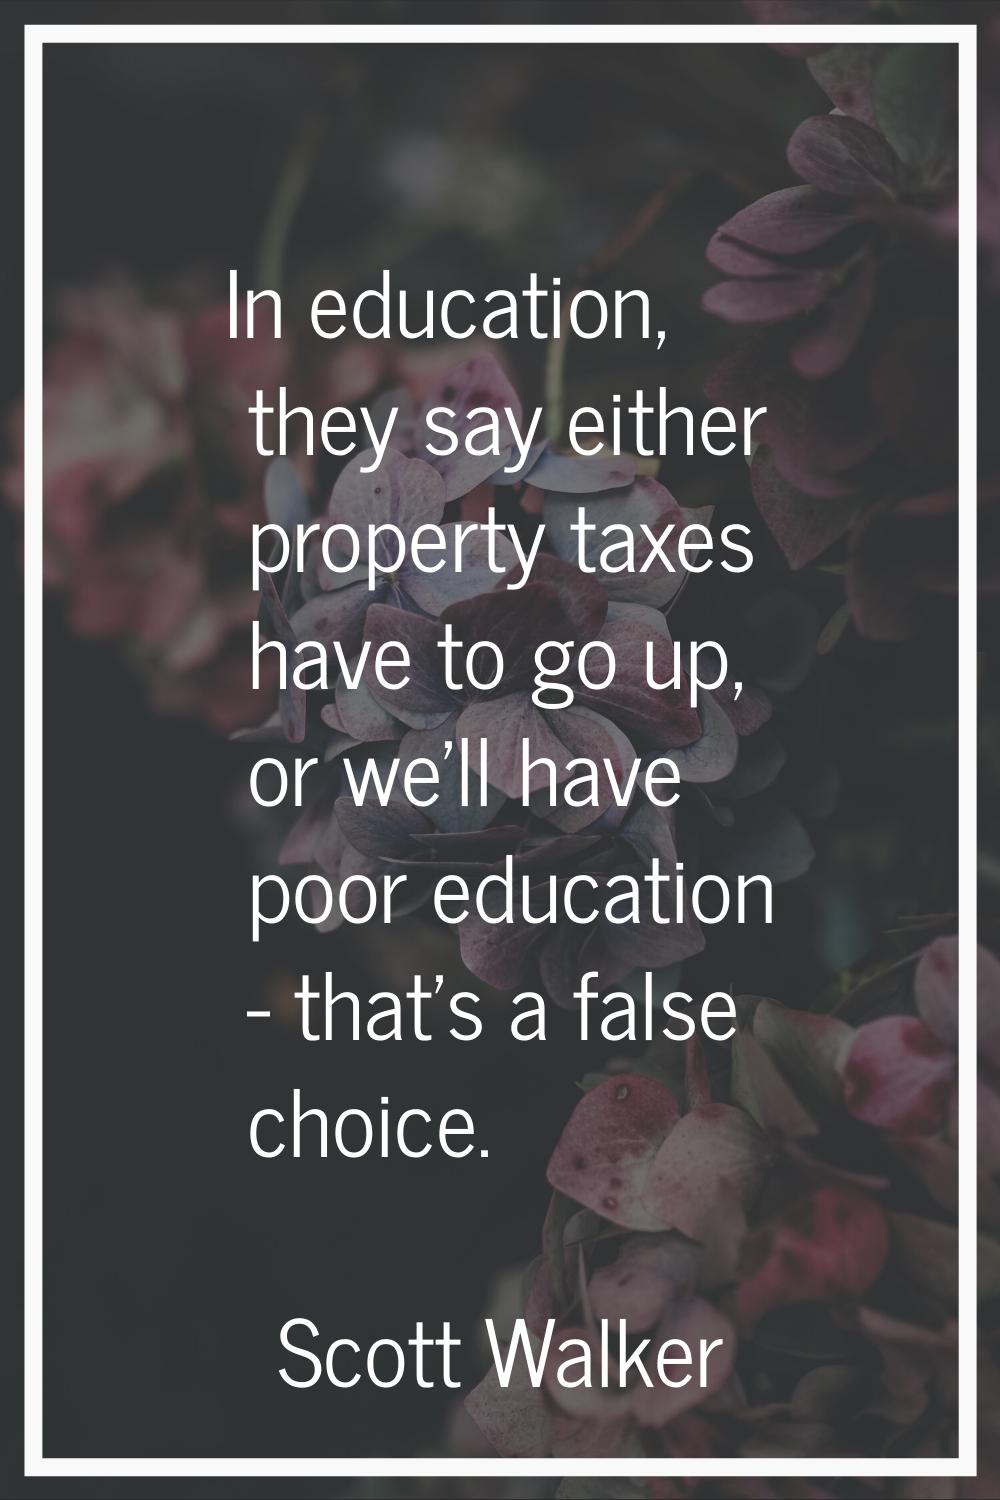 In education, they say either property taxes have to go up, or we'll have poor education - that's a